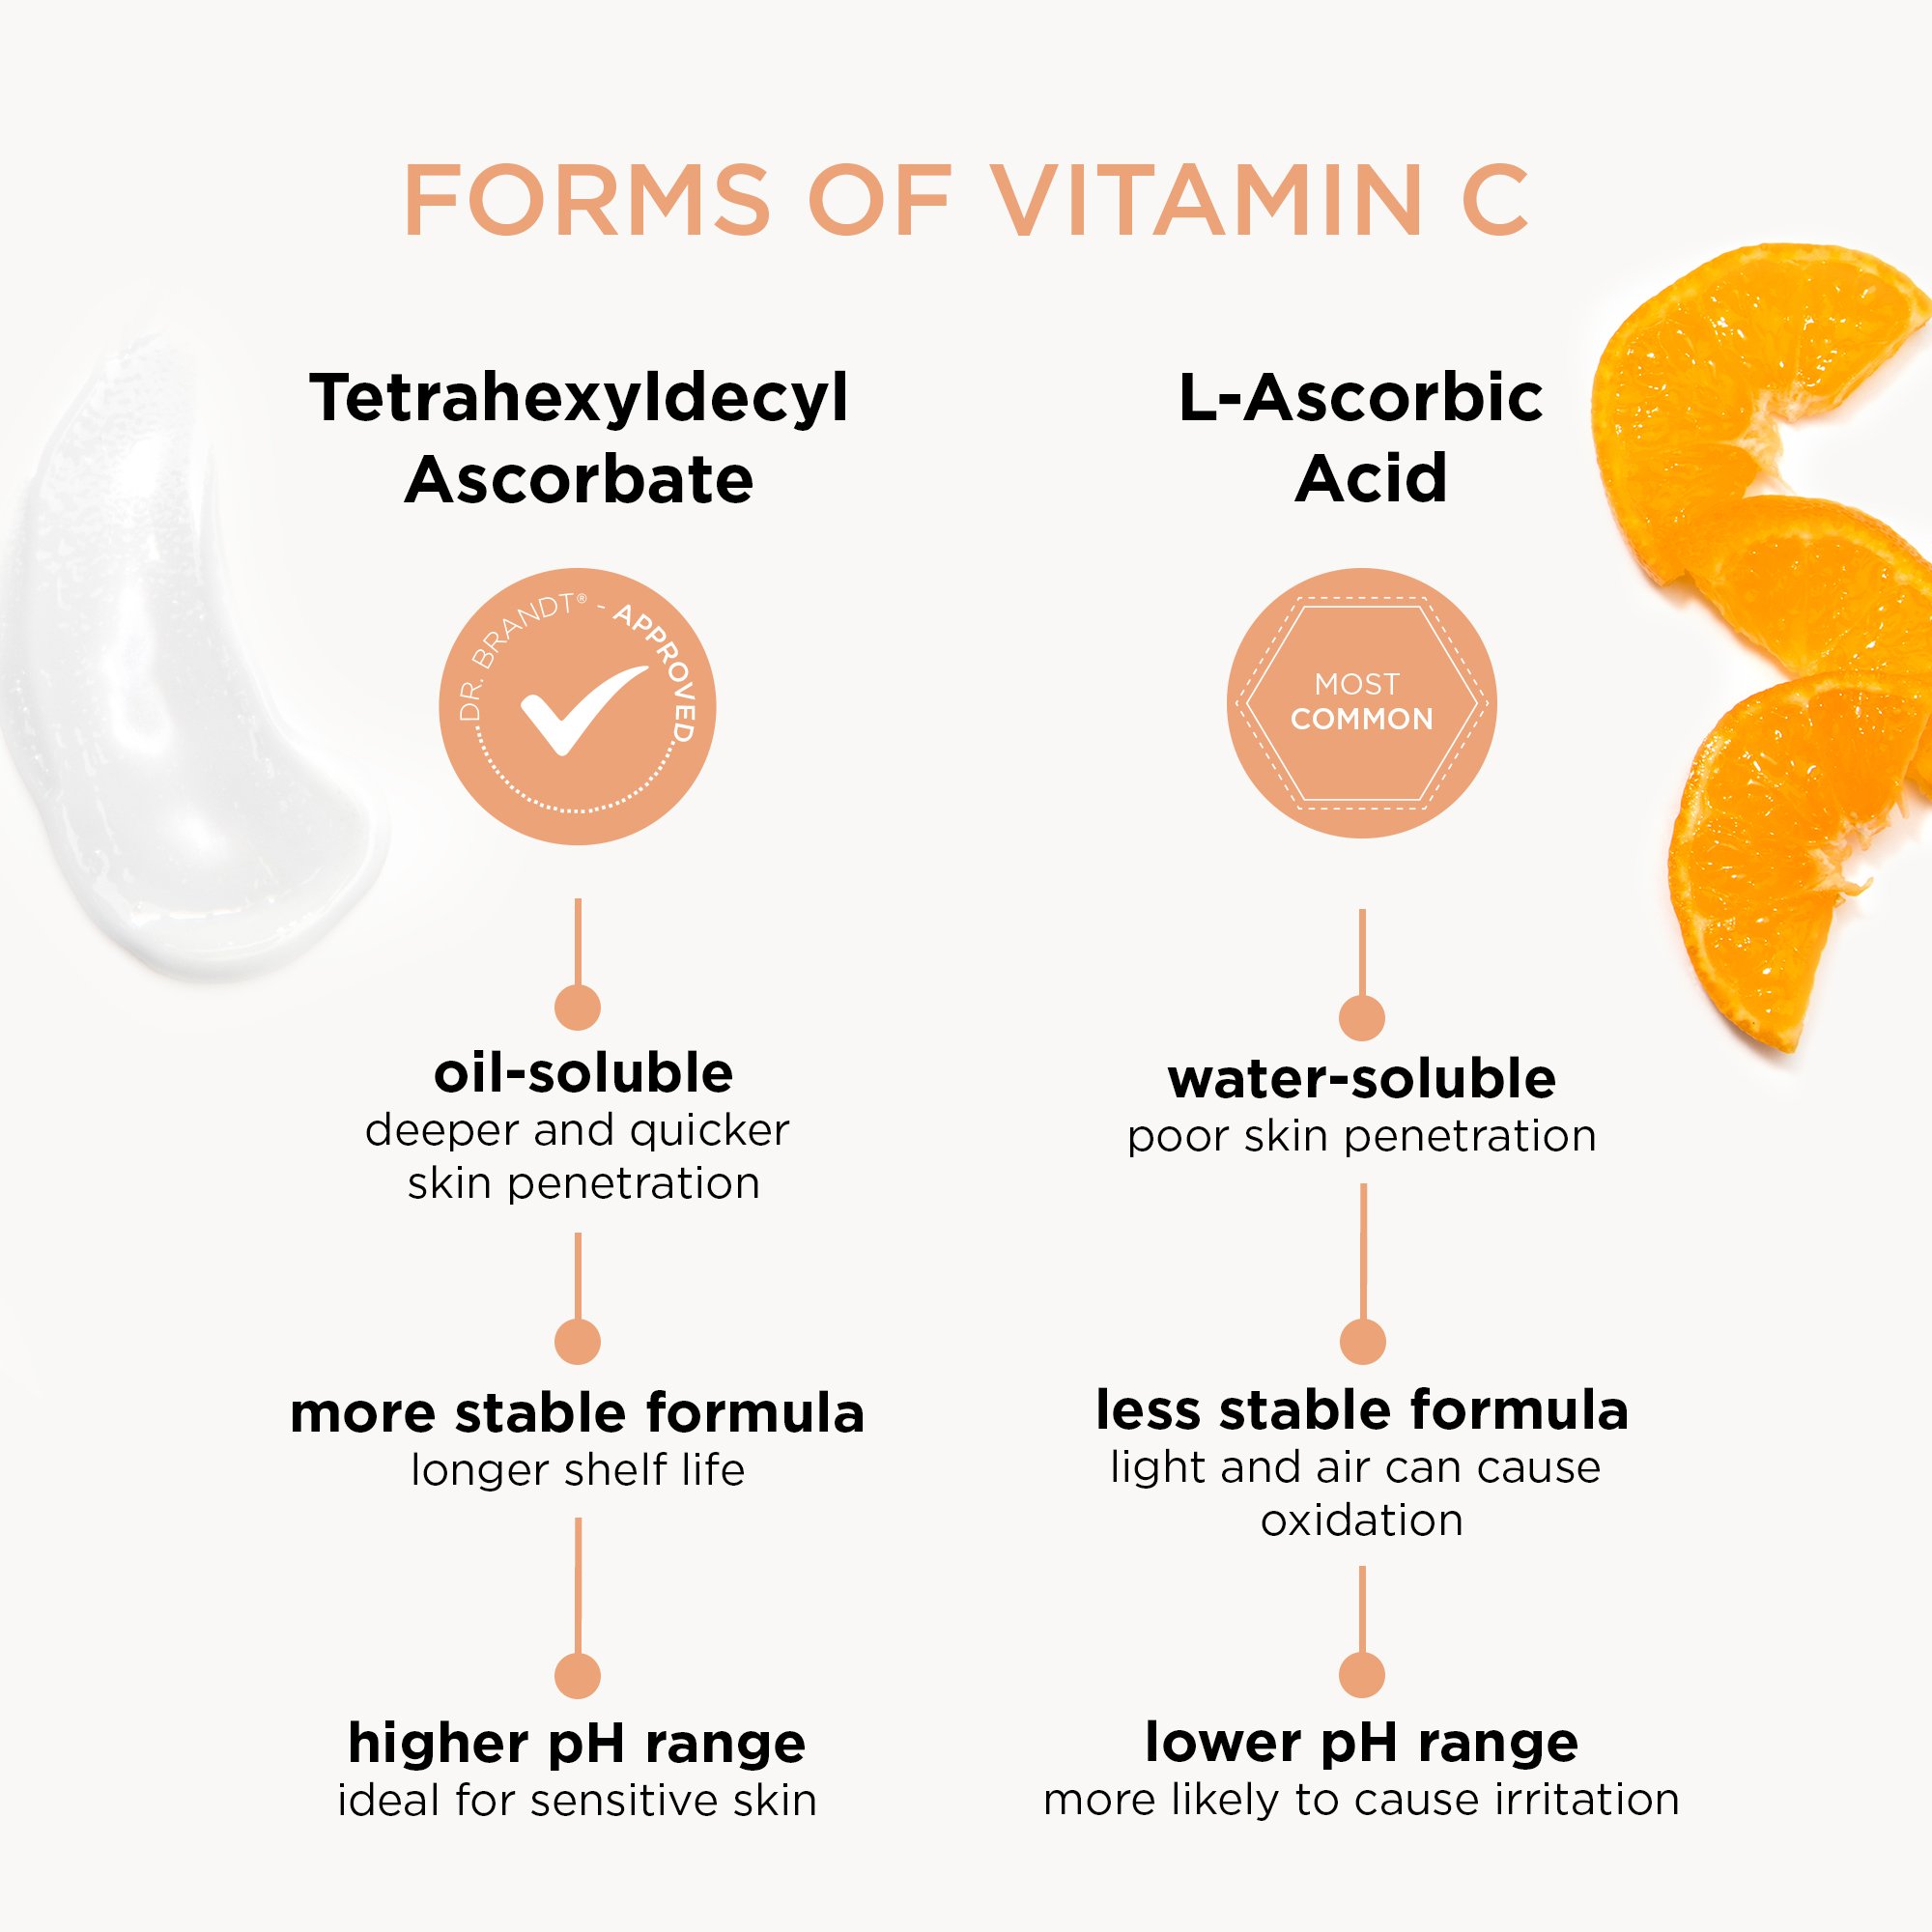 Forms of vitamin c